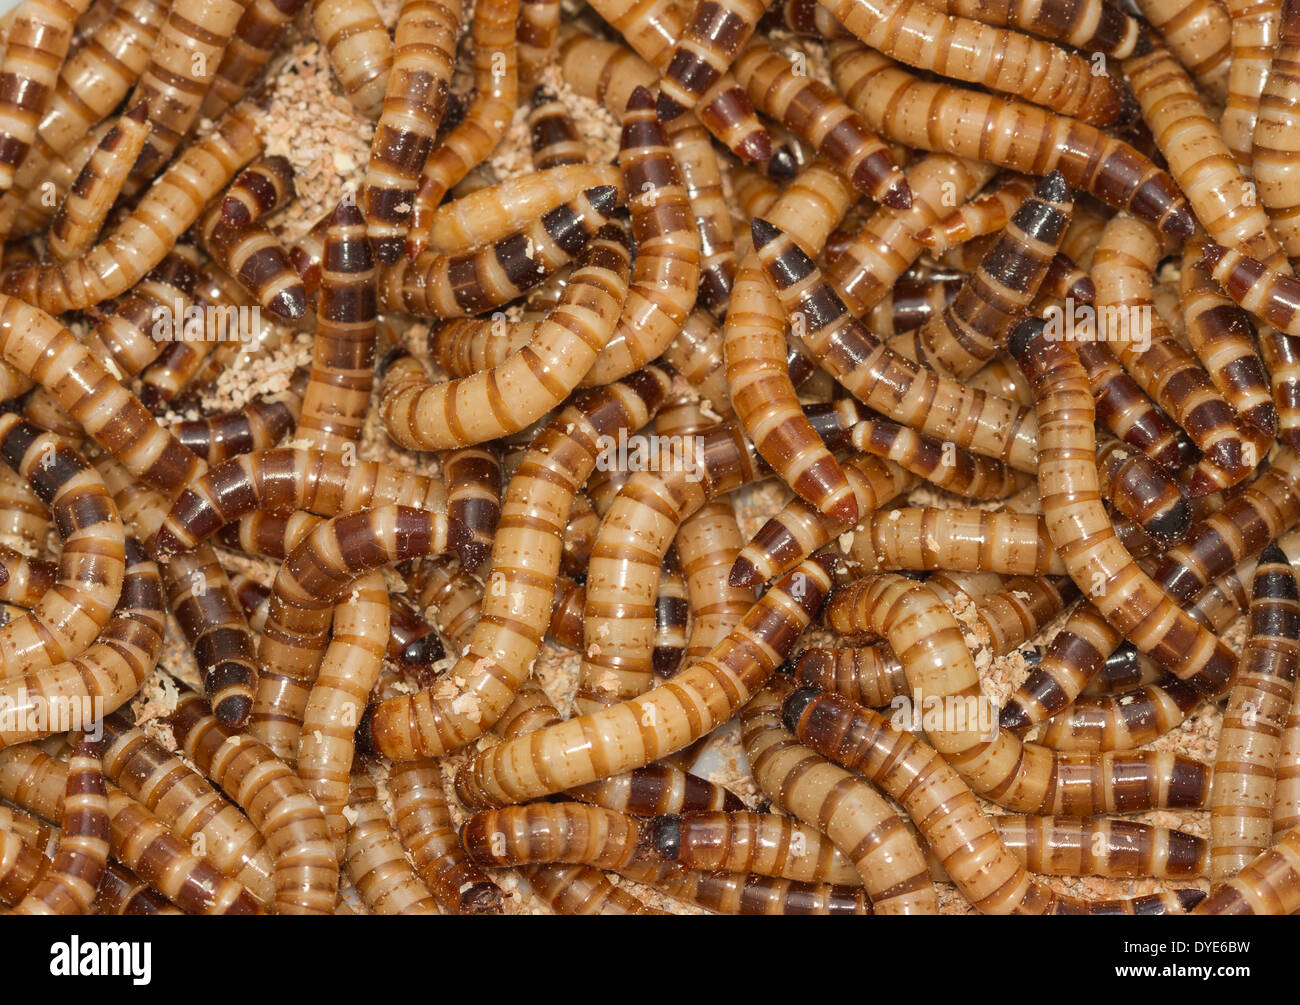 Worms texture and background,Meal worms bird food Stock Photo